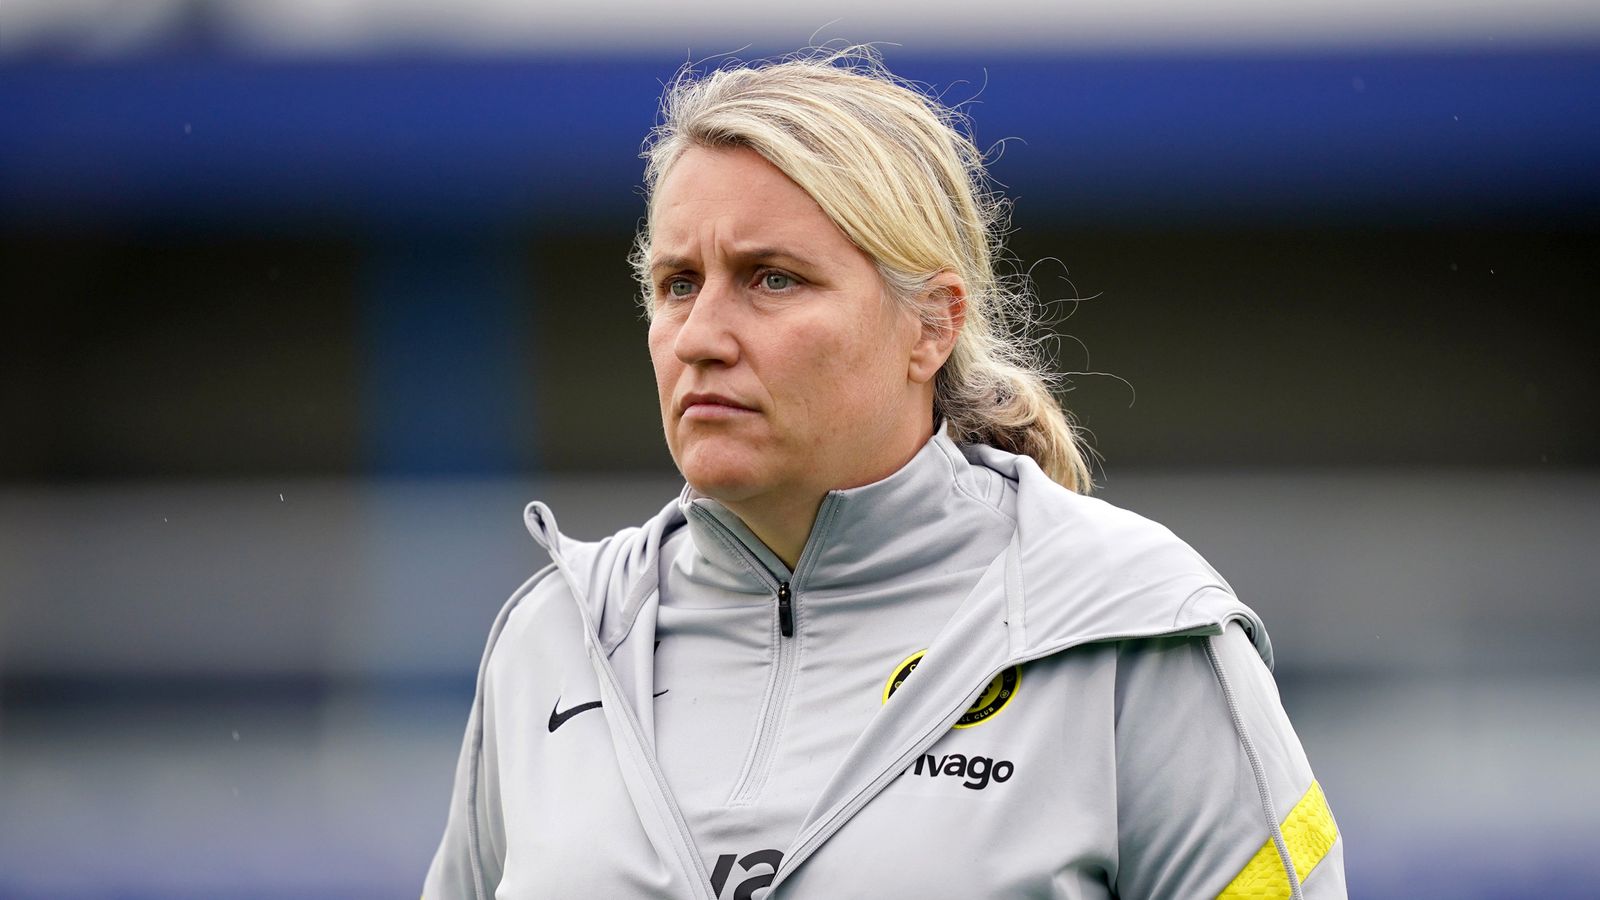 Chelsea boss Emma Hayes says scheduling of Women's FA Cup final 'could have been done better'